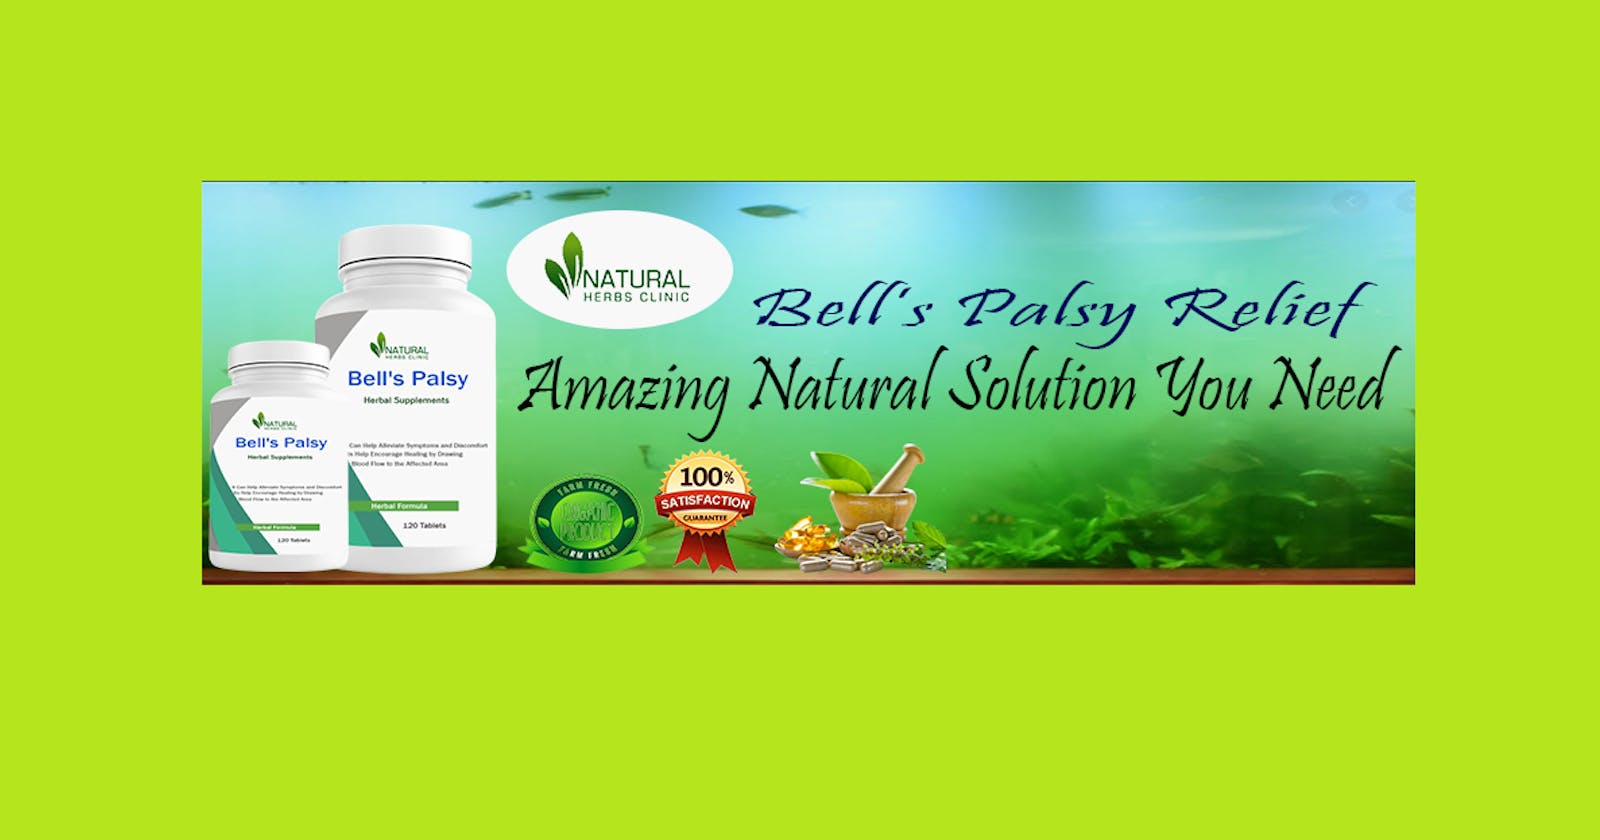 Bell’s Palsy Relief: Amazing Natural Solution You Need